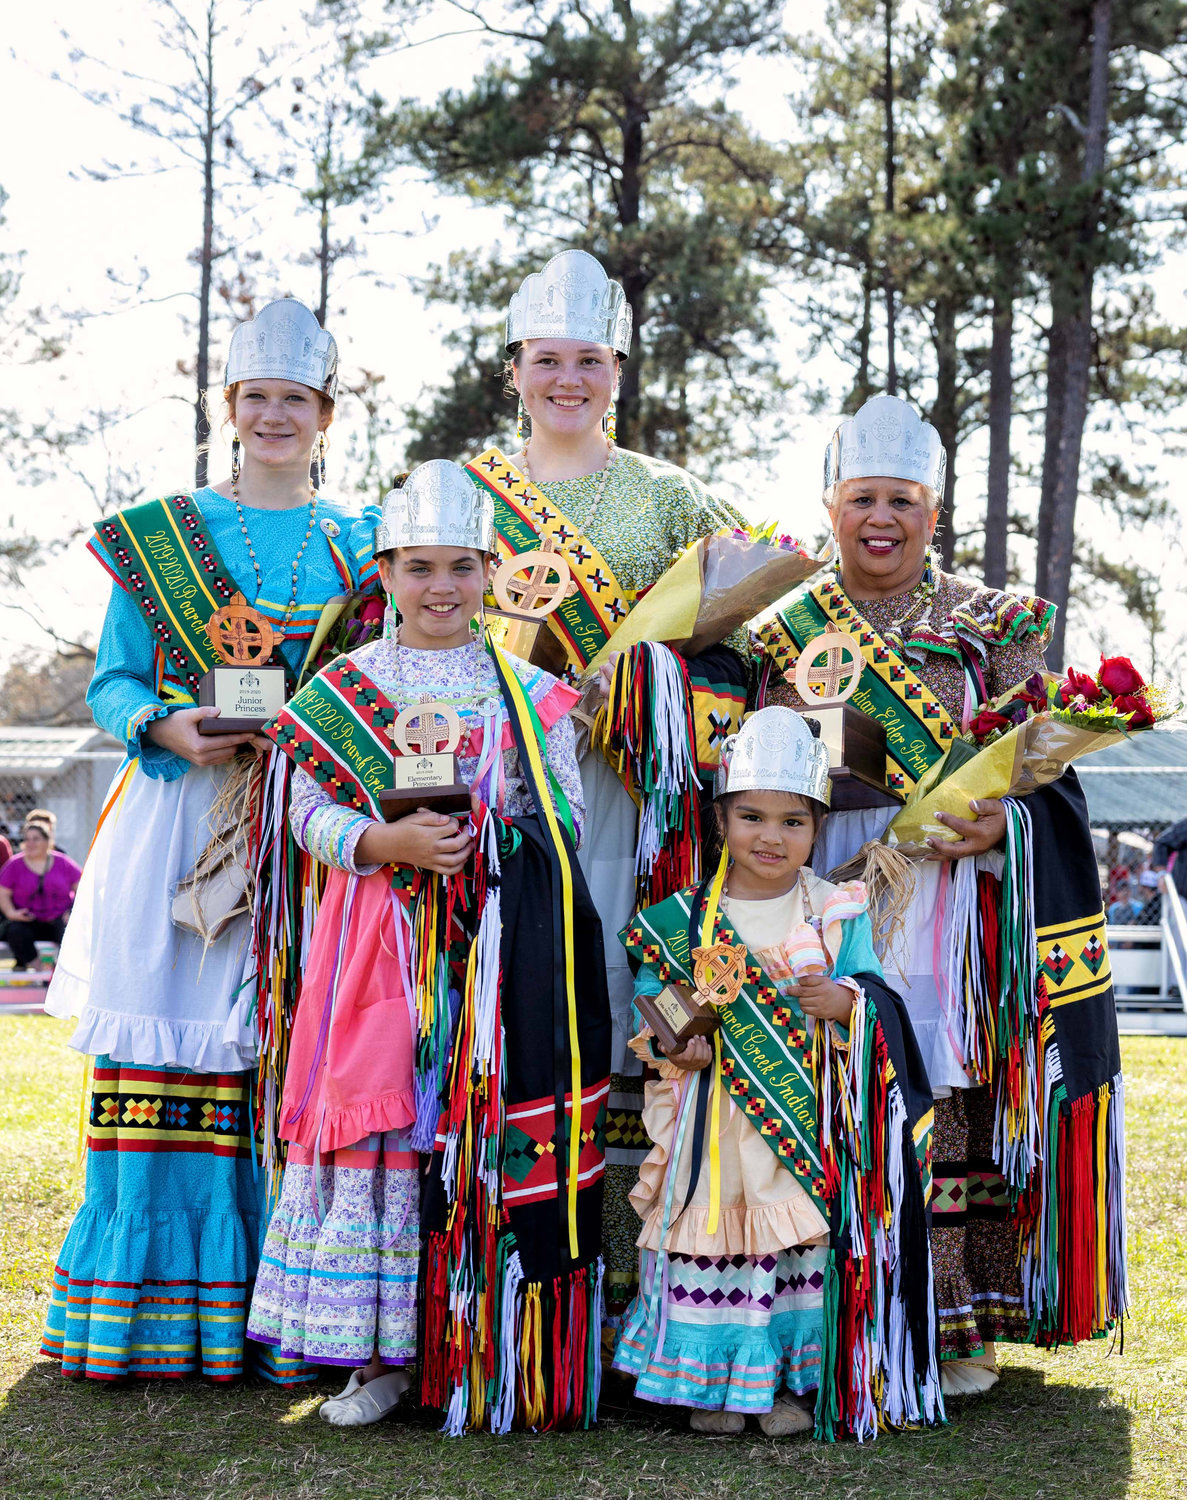 The annual crowning of the Poarch Creek Indian Princesses is one of the highlights of the event. Once crowned, Princesses will serve as Ambassadors of the Tribe throughout the year at public events as well as Tribal gatherings all-around the United States.